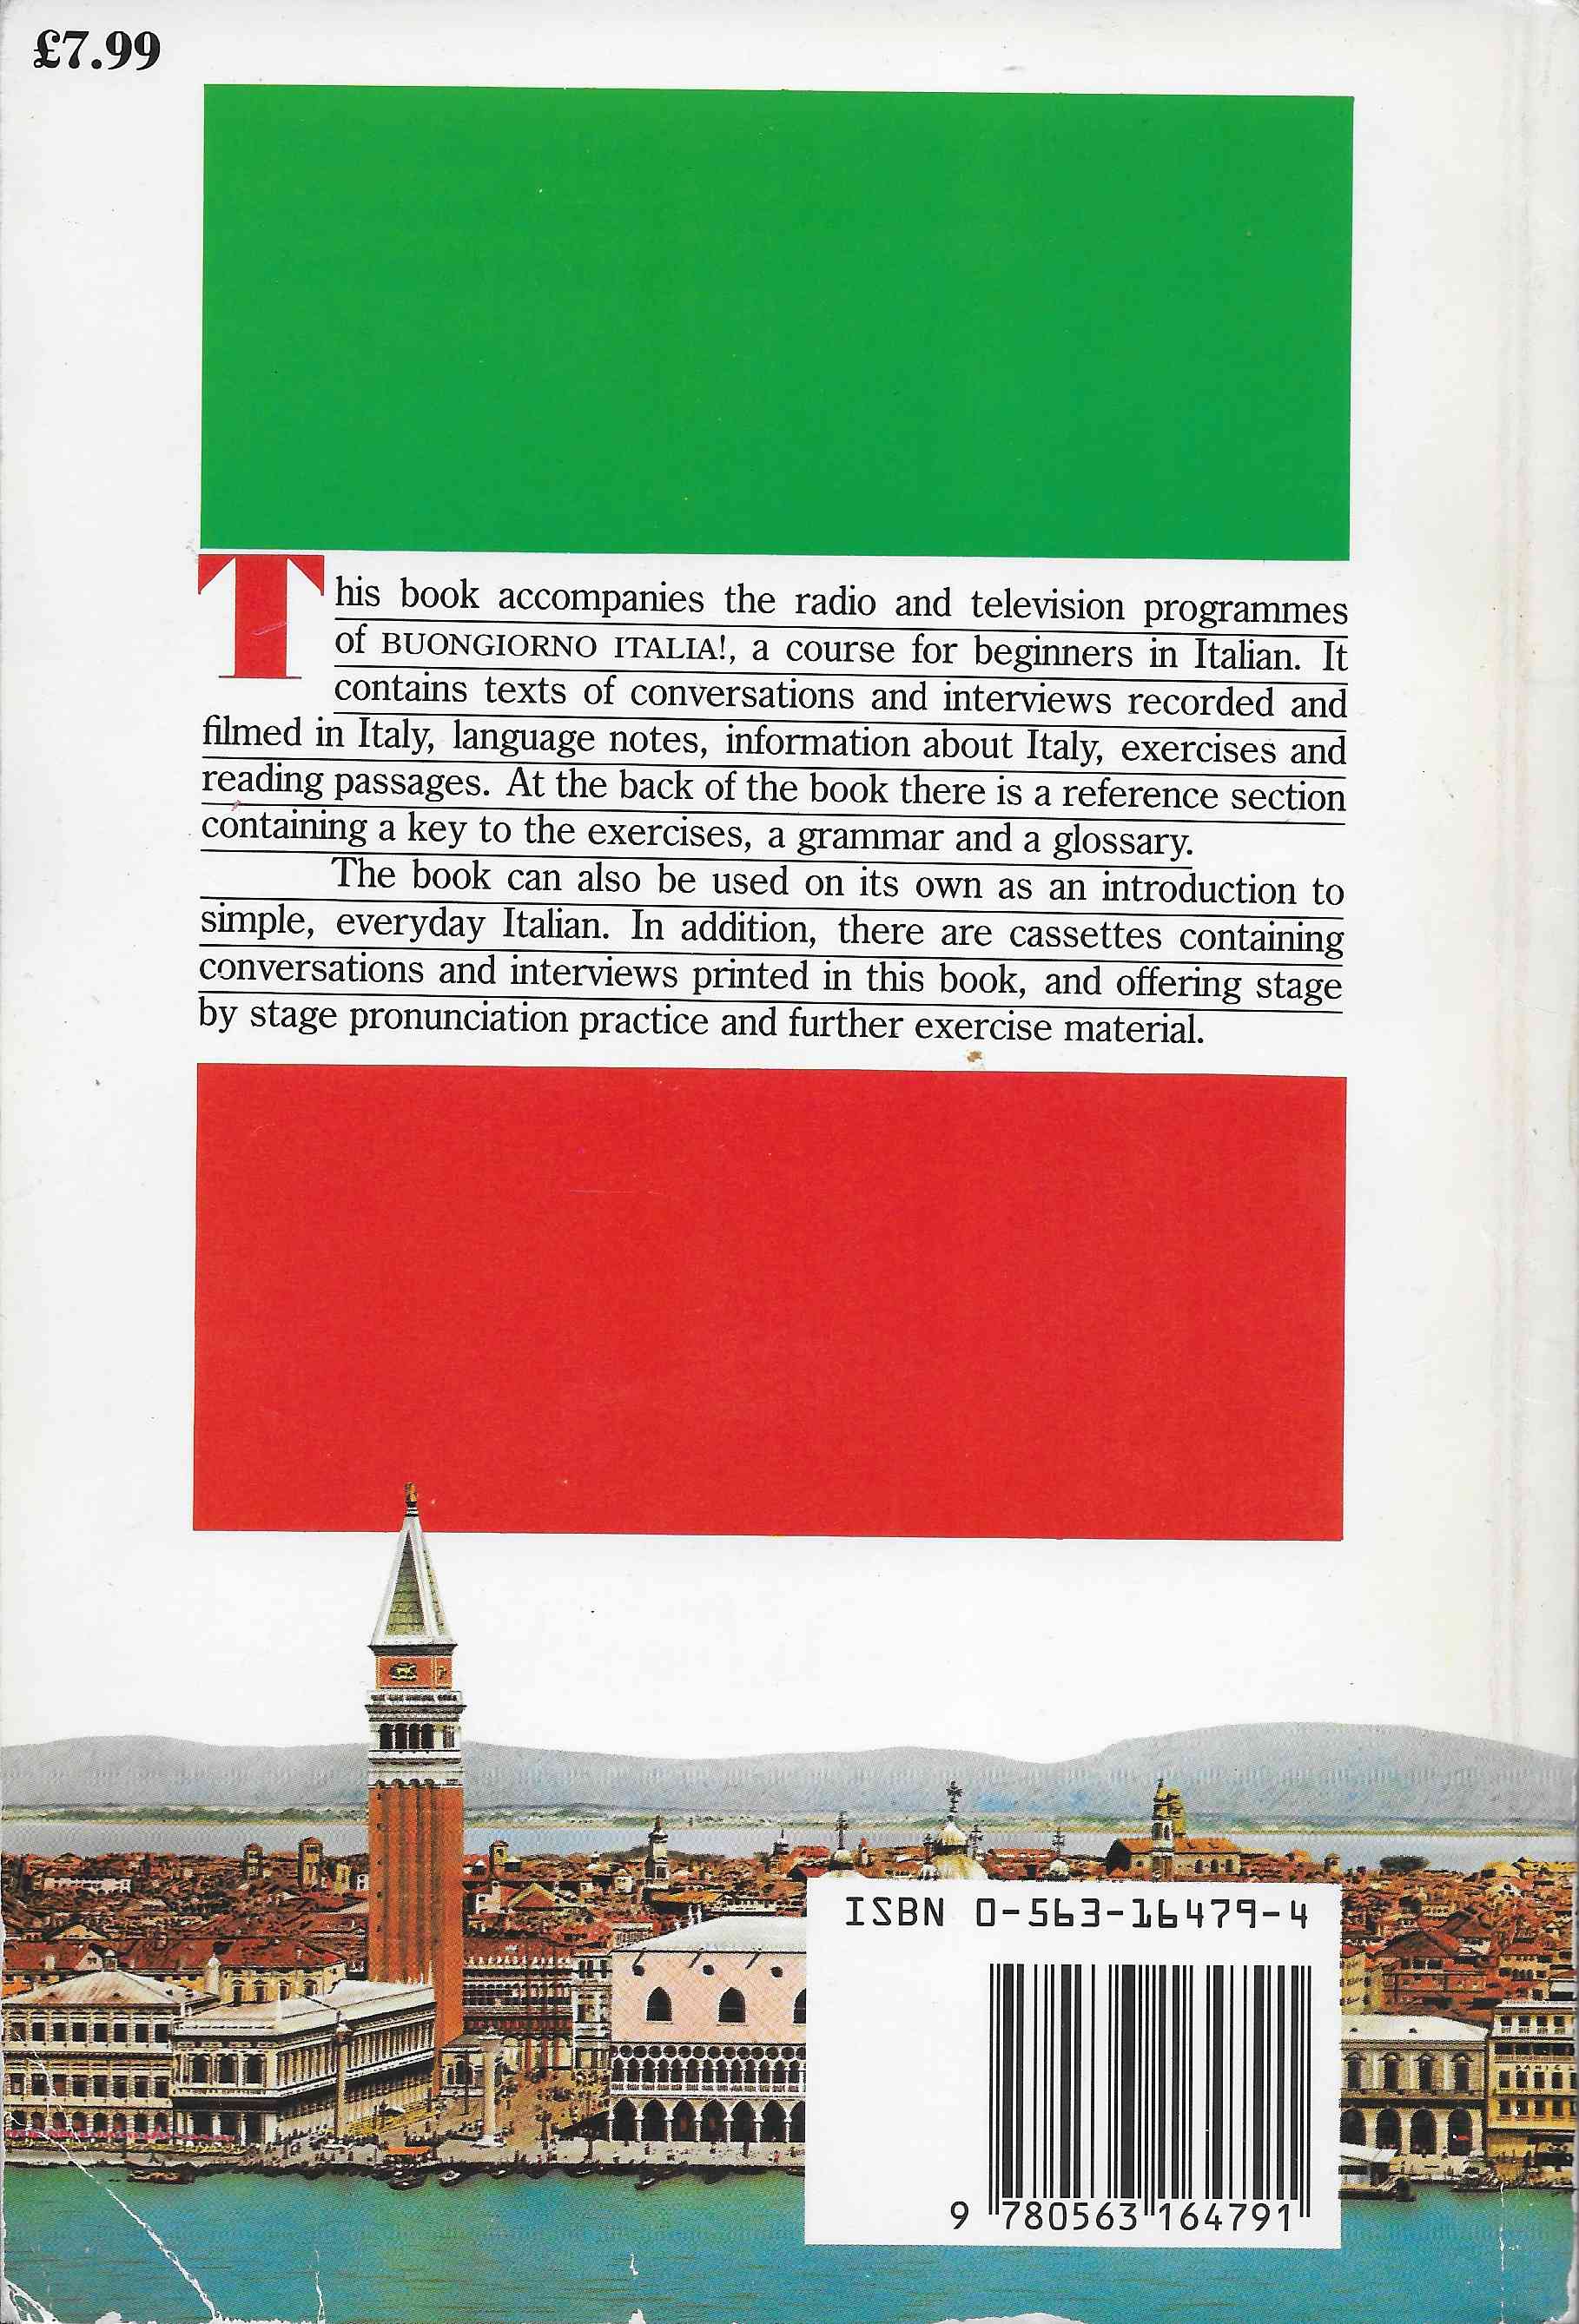 Picture of ISBN 0-563-16479-4 Buongiorno Italia! A combined BBC Radio and Television course for beginners in Italian by artist Unknown from the BBC records and Tapes library